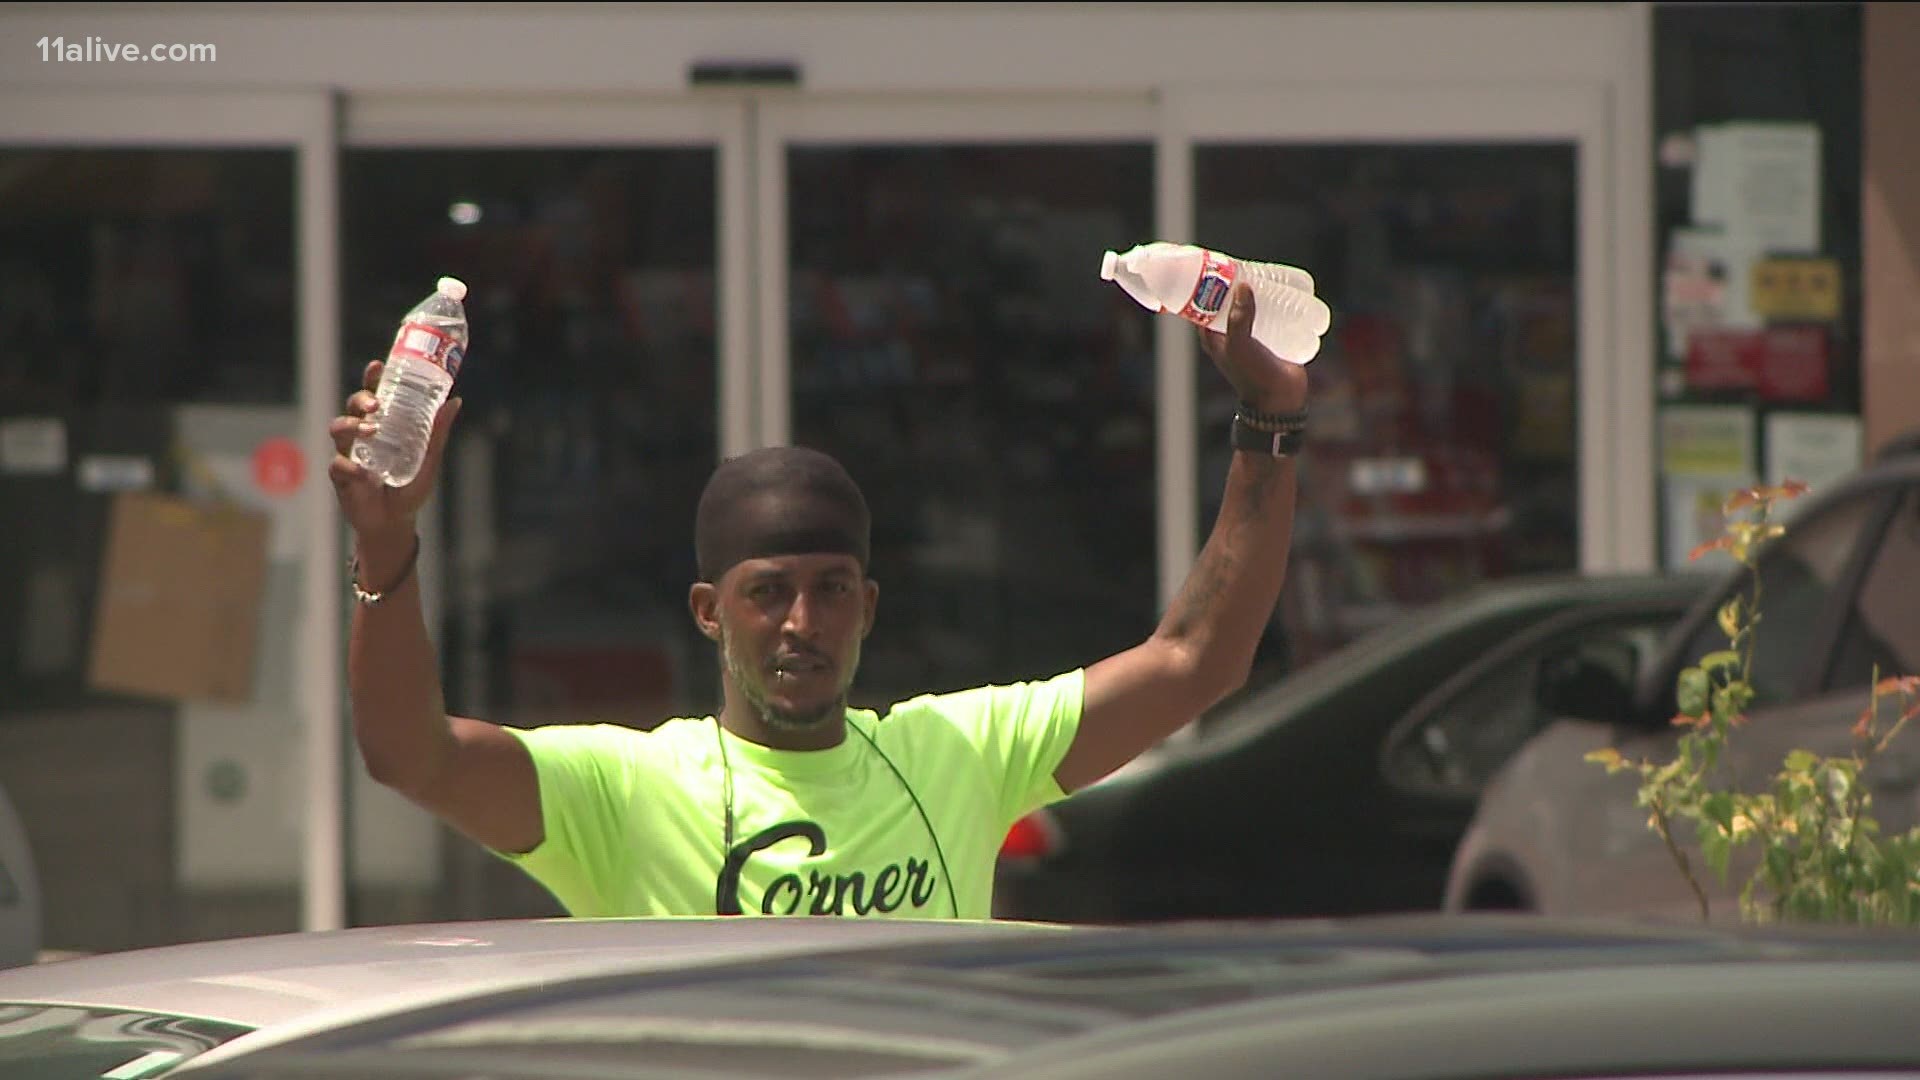 The Atlanta City Council said it wants to help the young people who sell water bottles at street corners.